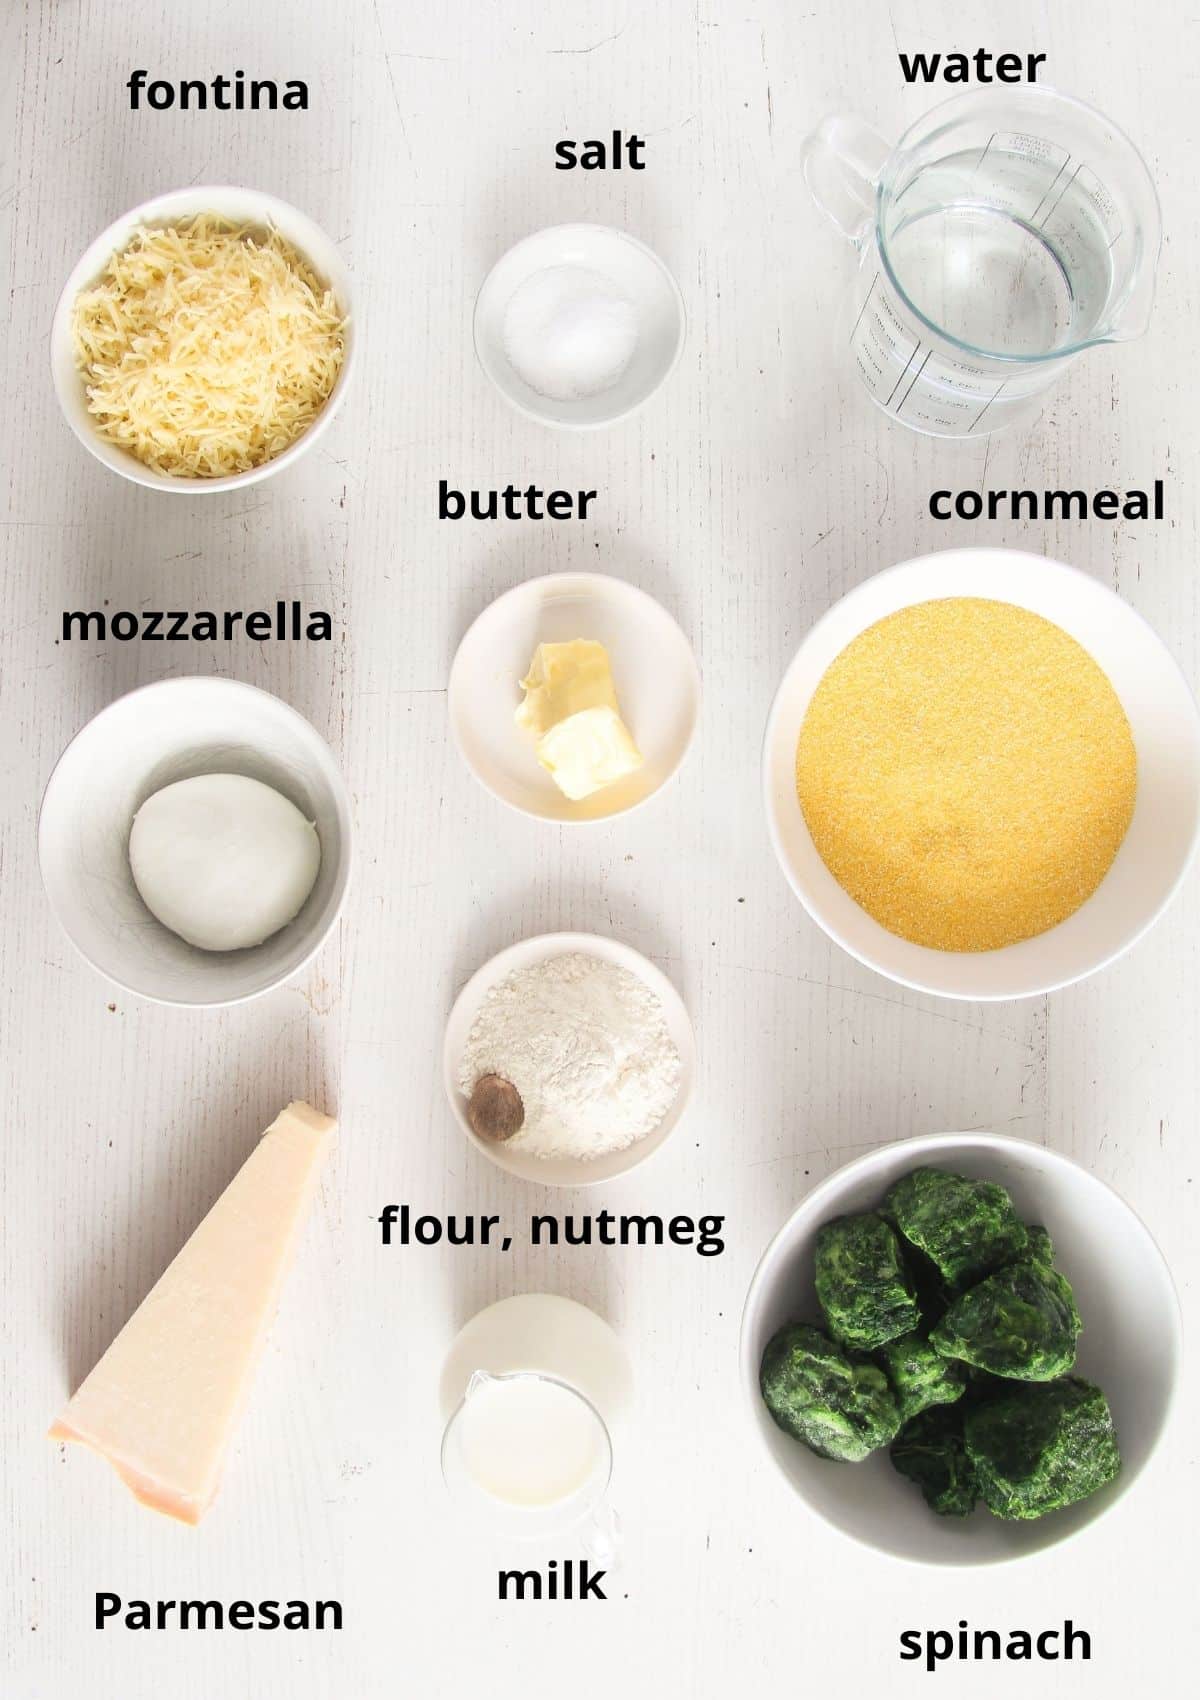 listed ingredients for polenta al forno with spinach on the table.